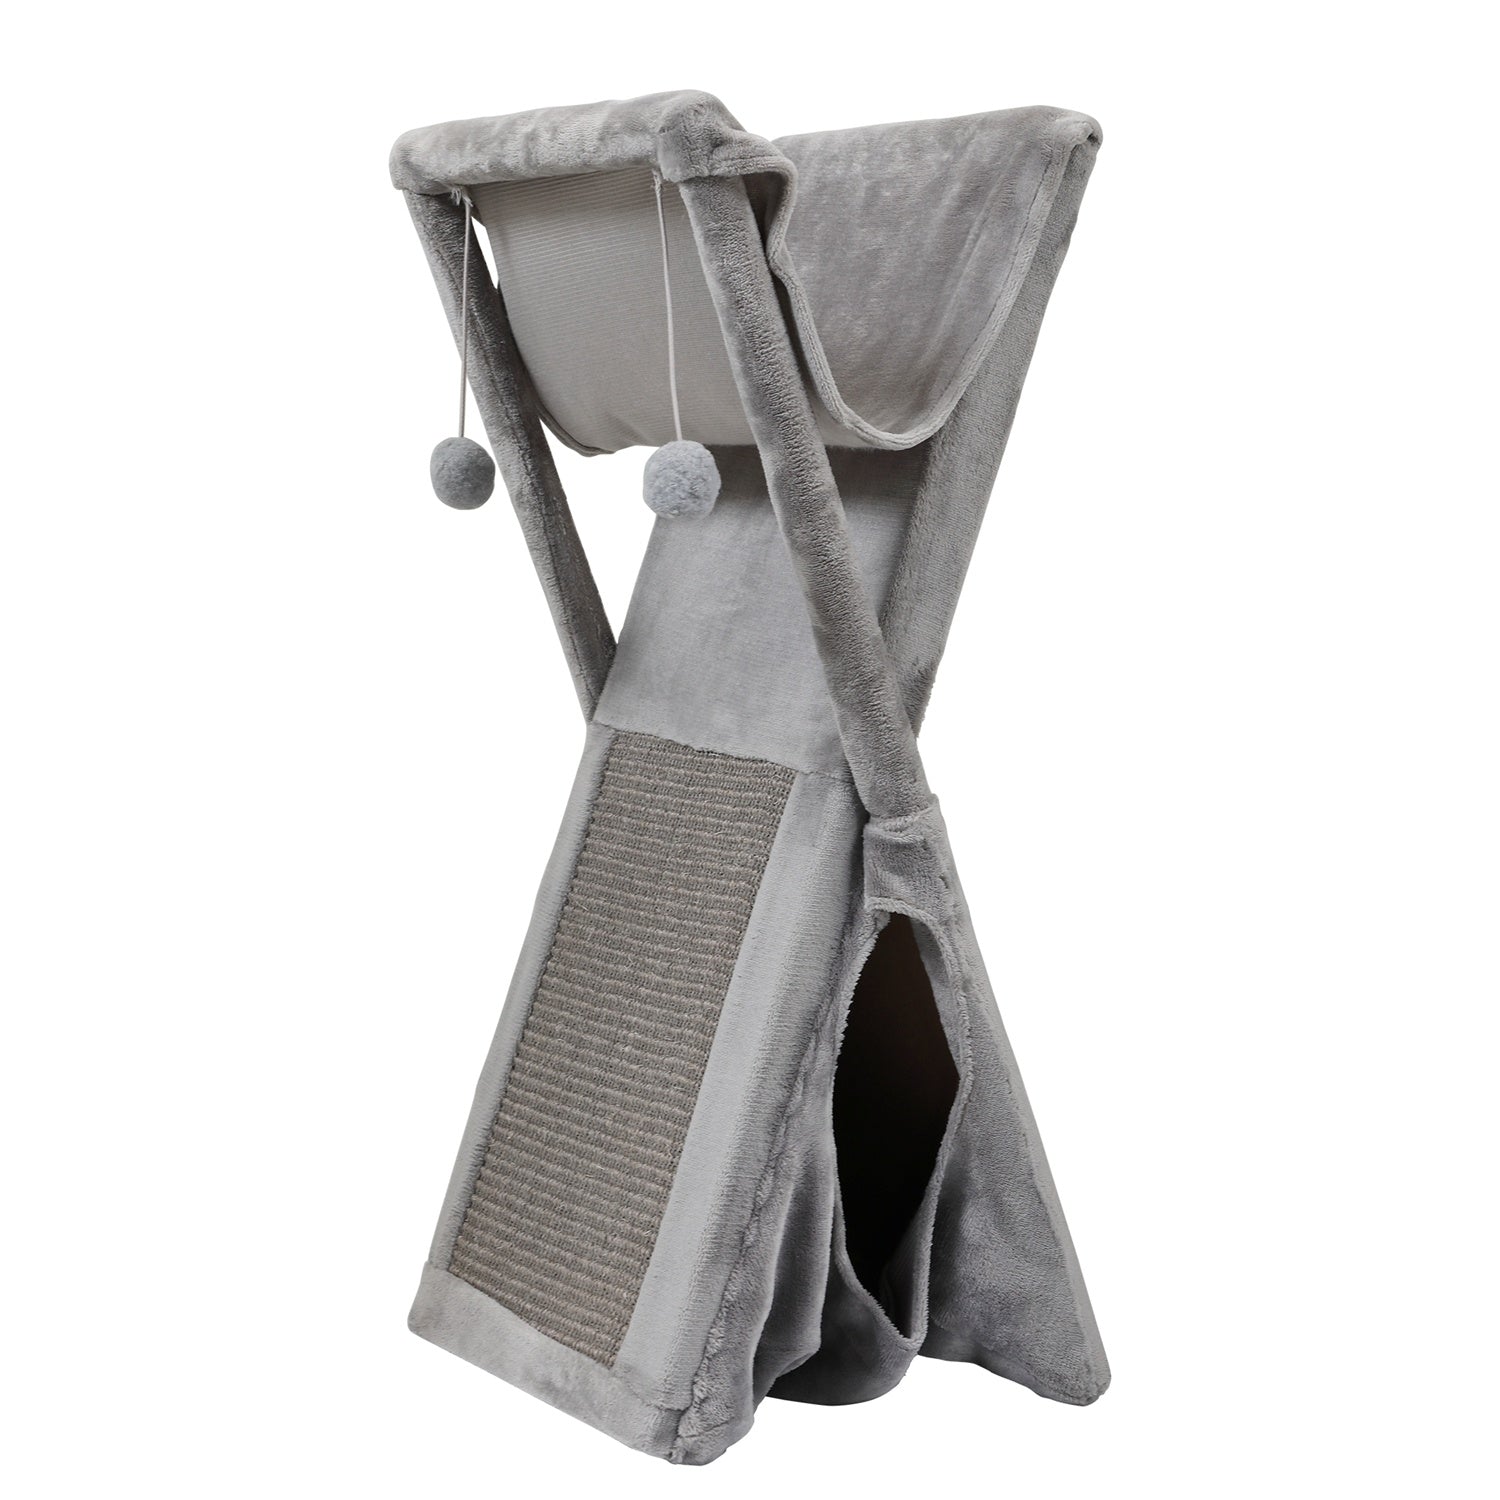 A cat is standing next to a Folding Cat Tower Tree, 2-Tier Pet House with Scratching Pad, Cat Nest Hammock for Small to Middle Kitten - Gray XH.